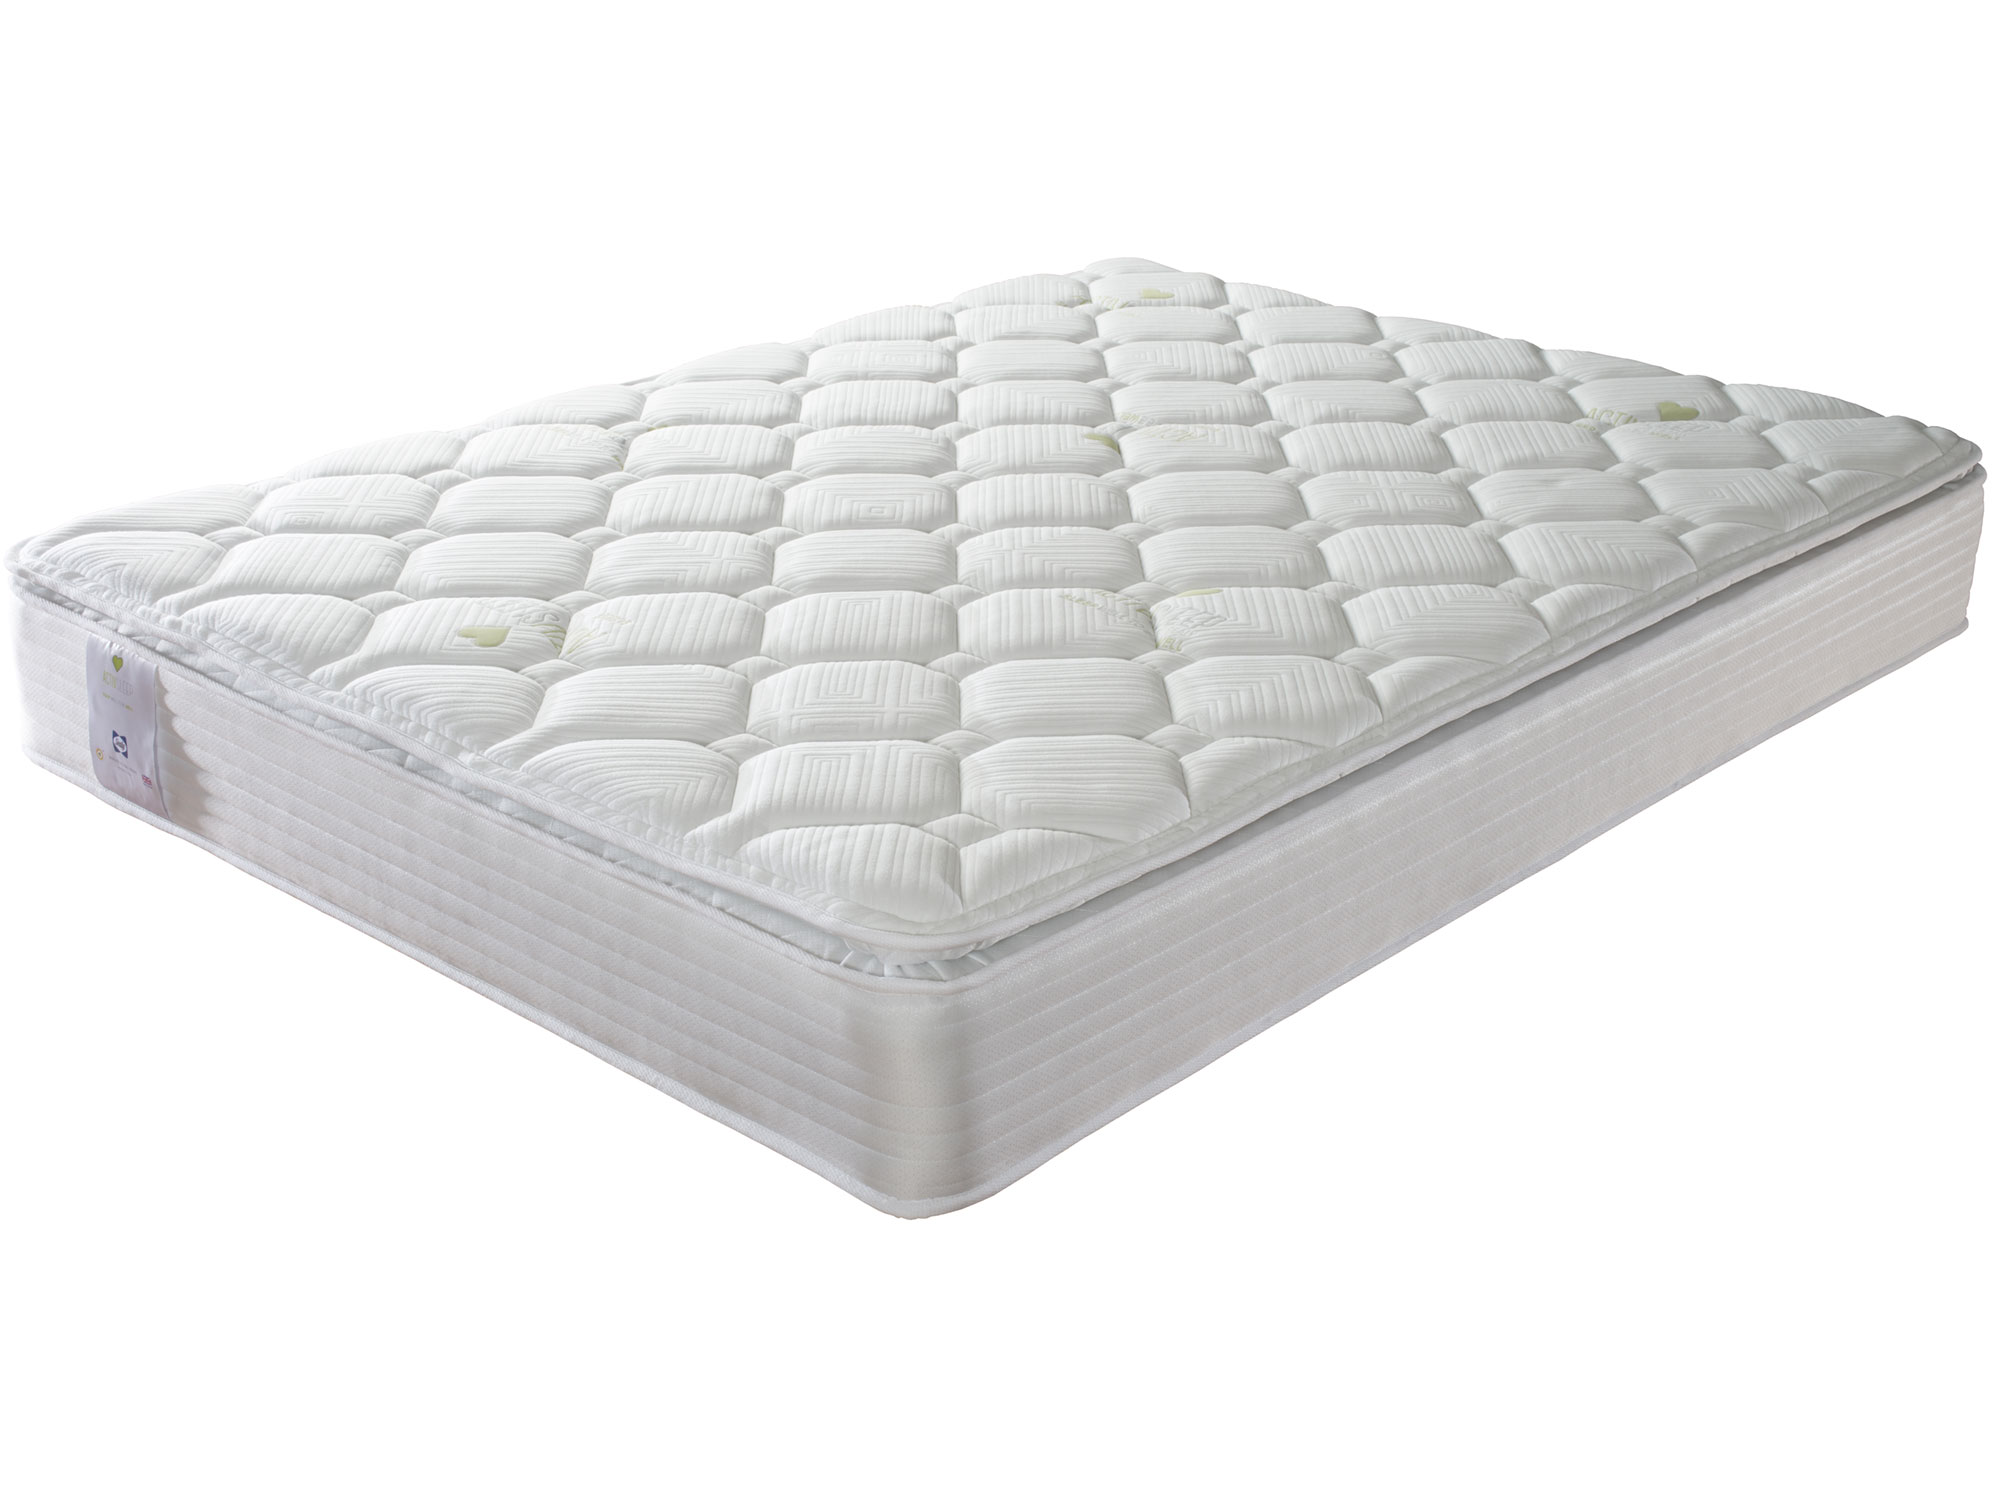 5ft King Size Sealy ActivSleep Ortho Posture Pillow Top Mattress